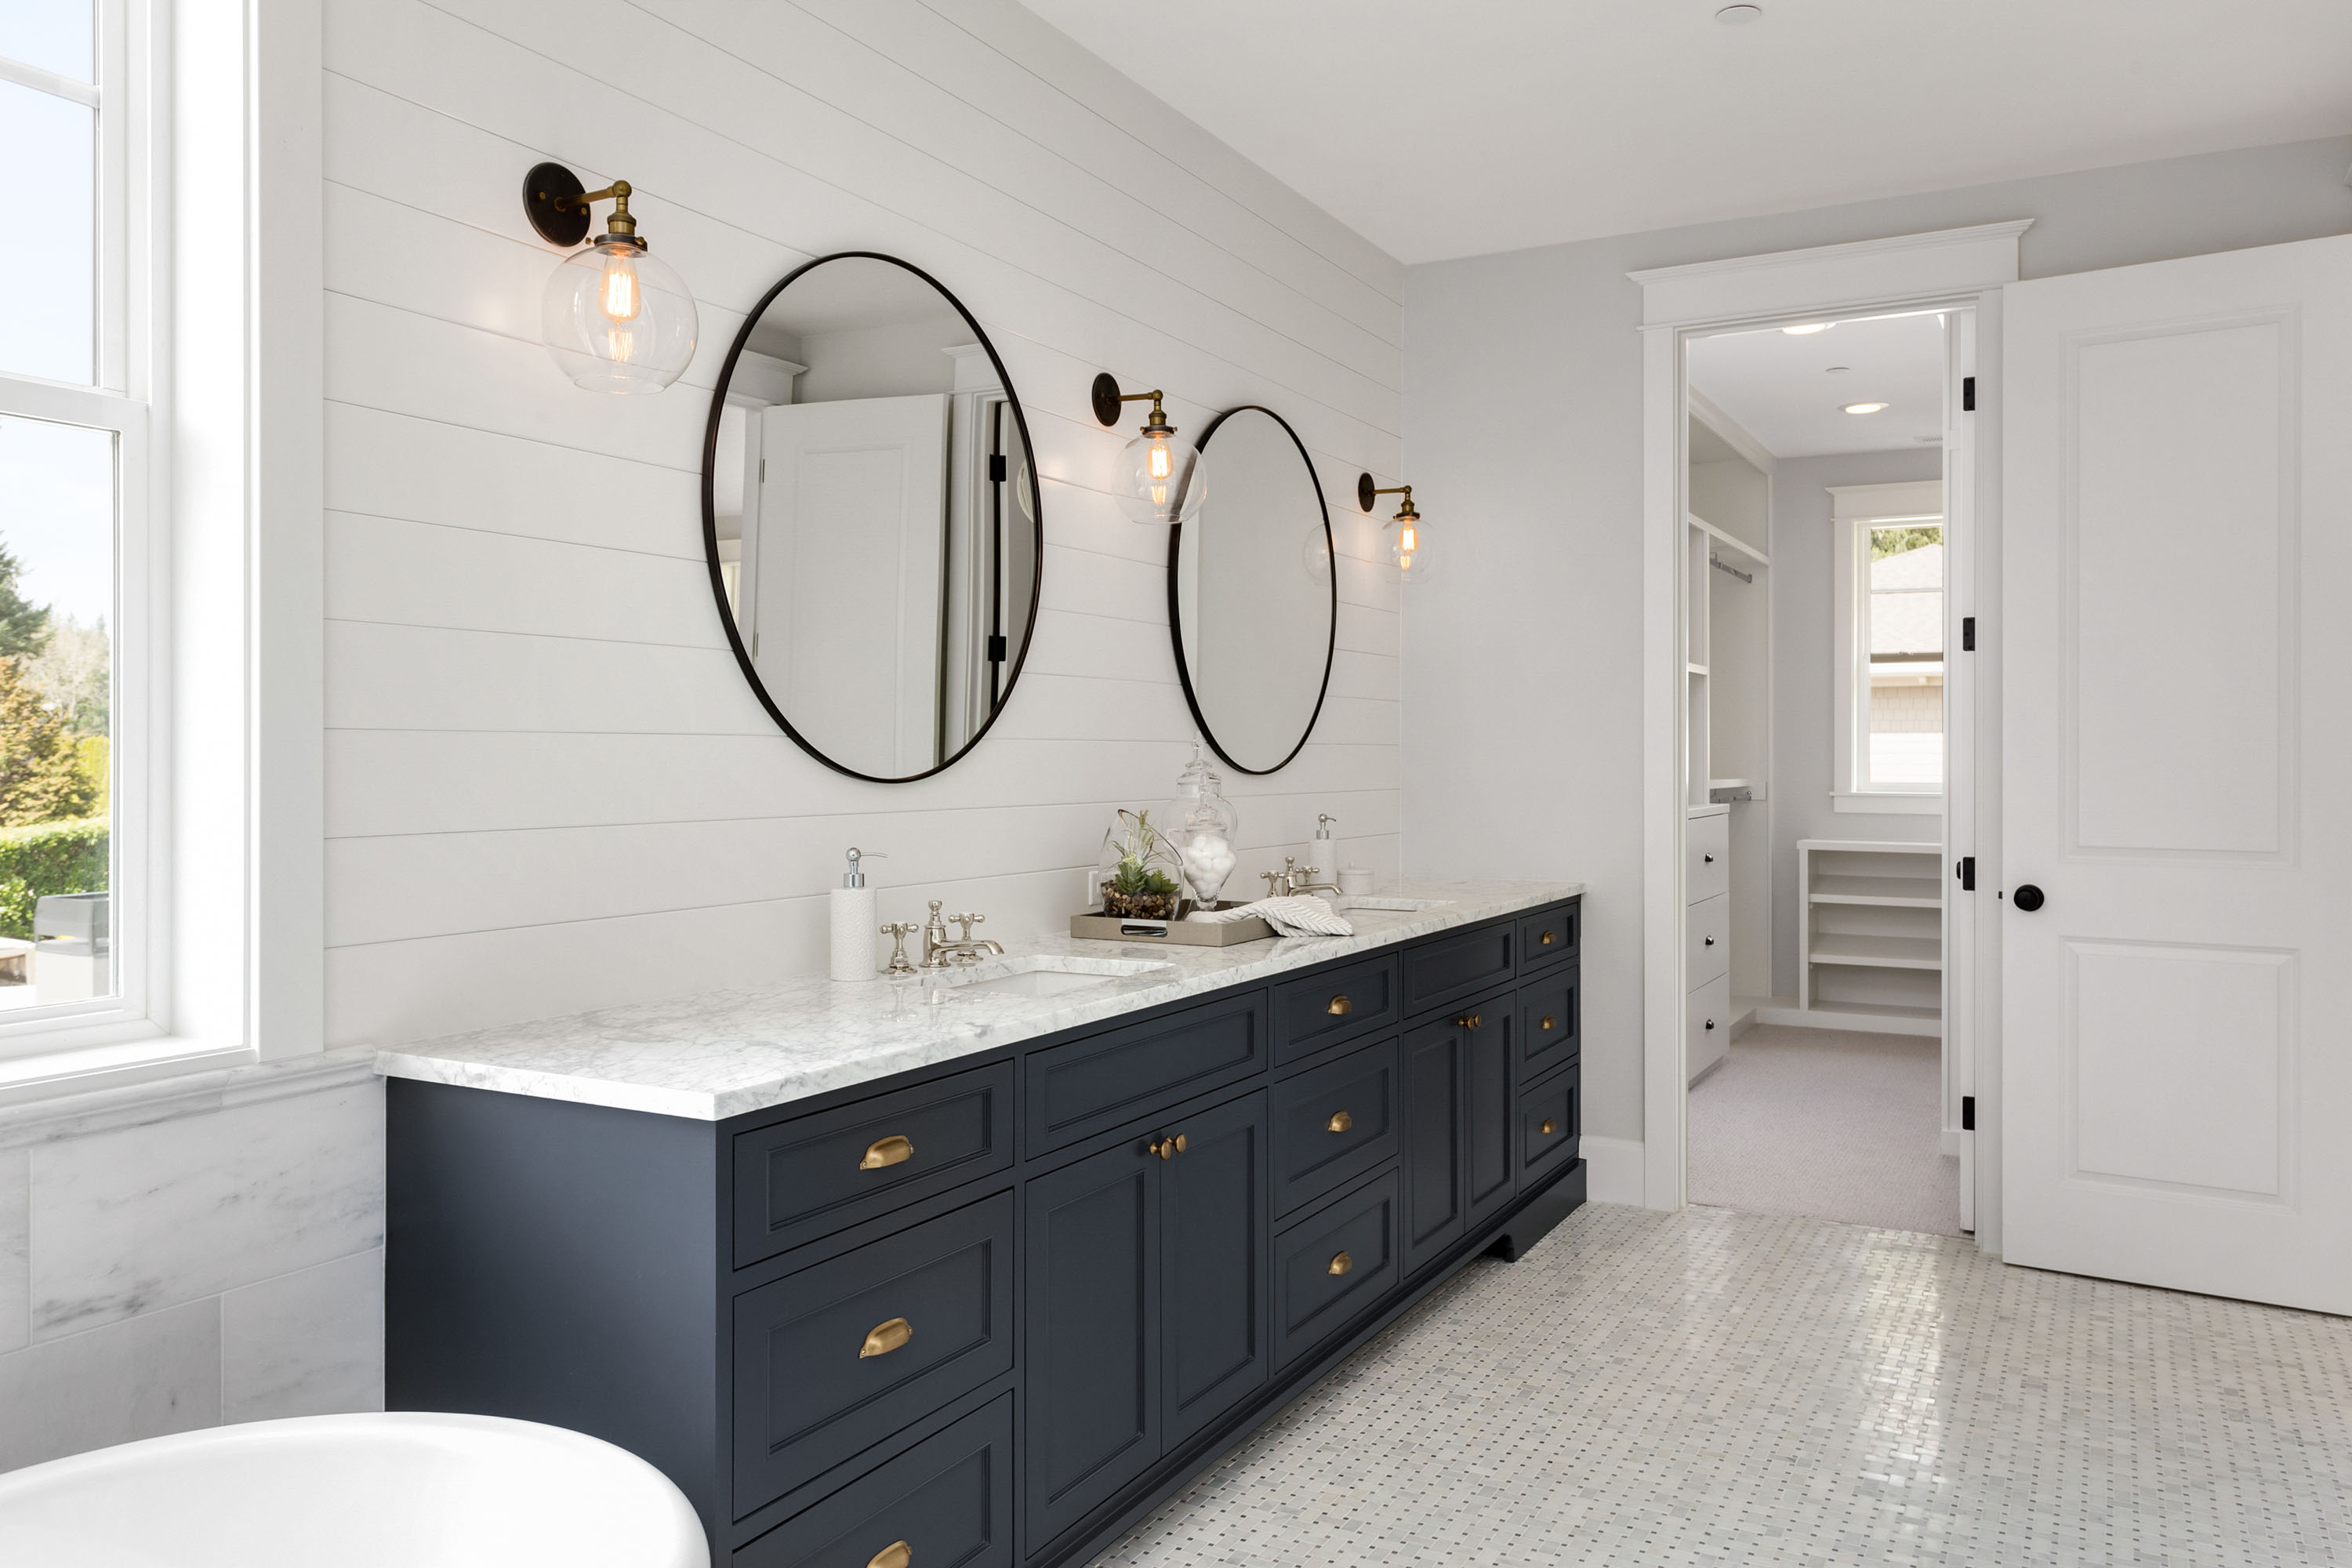 Best Bathroom Paints 6 Moisture, What Type Of Paint To Use In A Bathroom